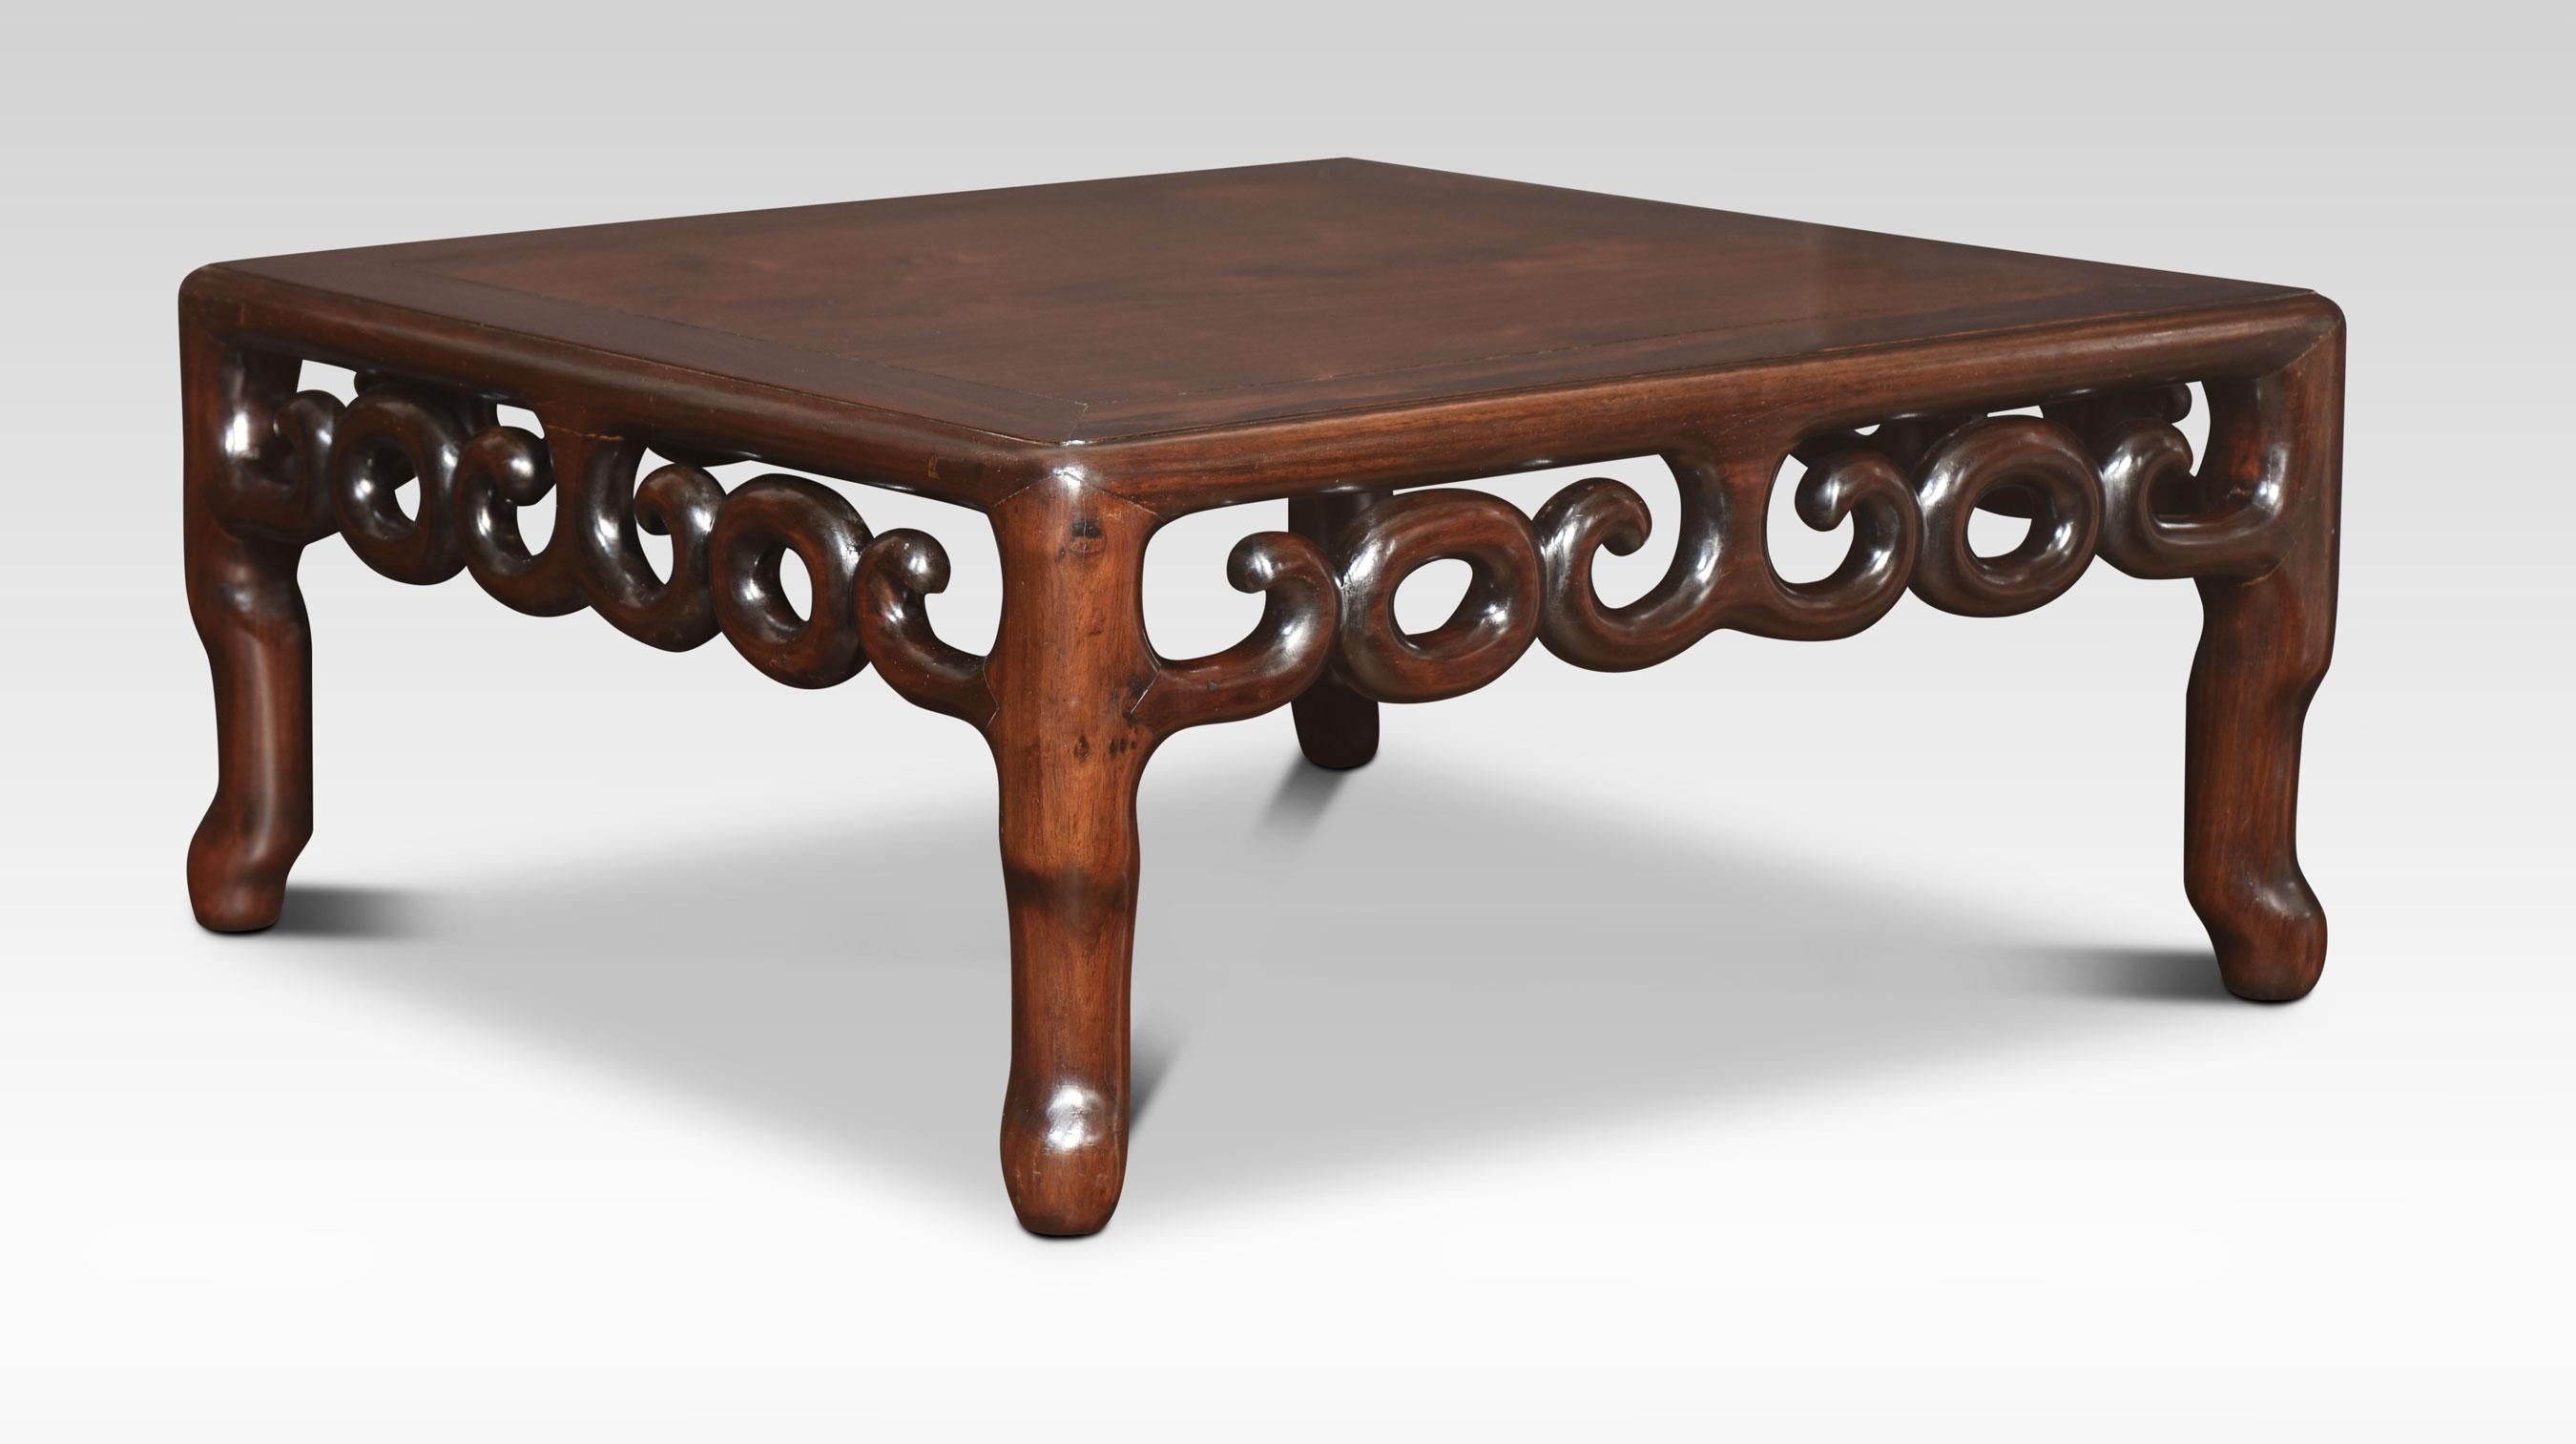 Chinese opium/coffee table the well-figured square top above the pierced frieze. All raised on moulded legs.
Dimensions
Height 11.5 Inches
Width 25 Inches
Depth 25 Inches